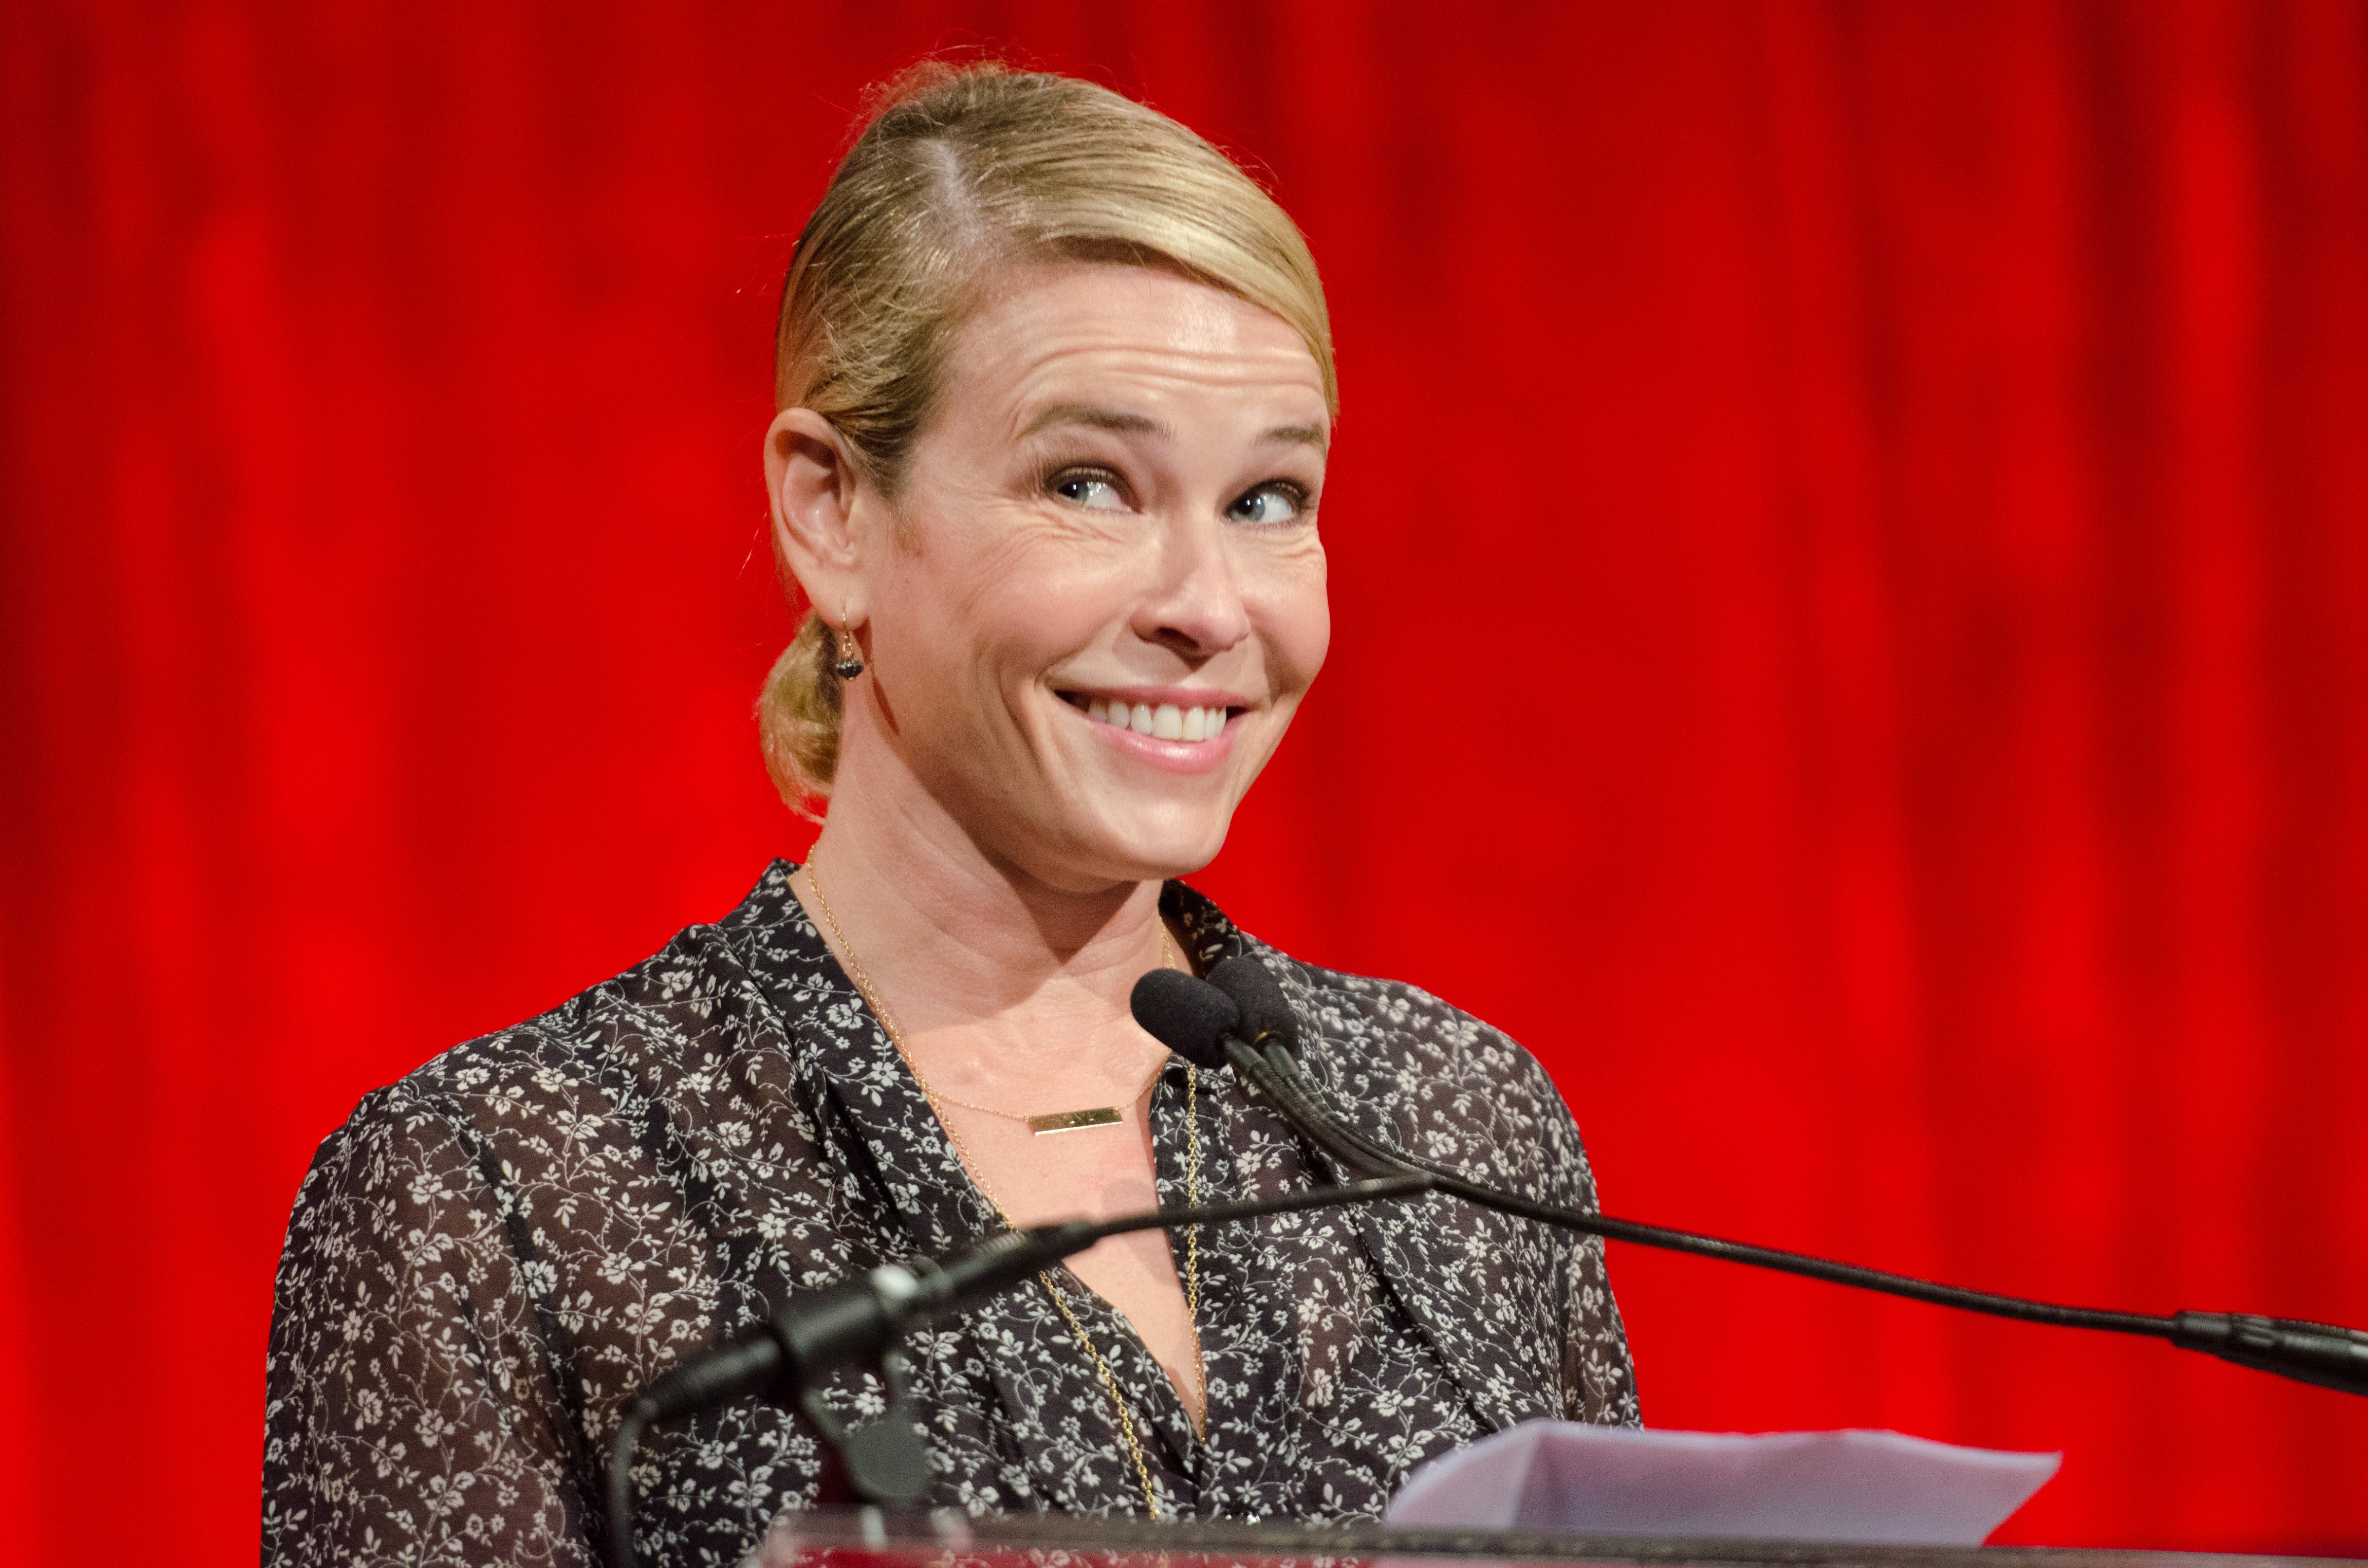 Chelsea Handler speaks at the Ms. Foundation for Women Gloria Awards at Cipriani 42nd Street on Thursday, May 1, 2014 in New York. (Scott Roth—Scott Roth/Invision/AP)